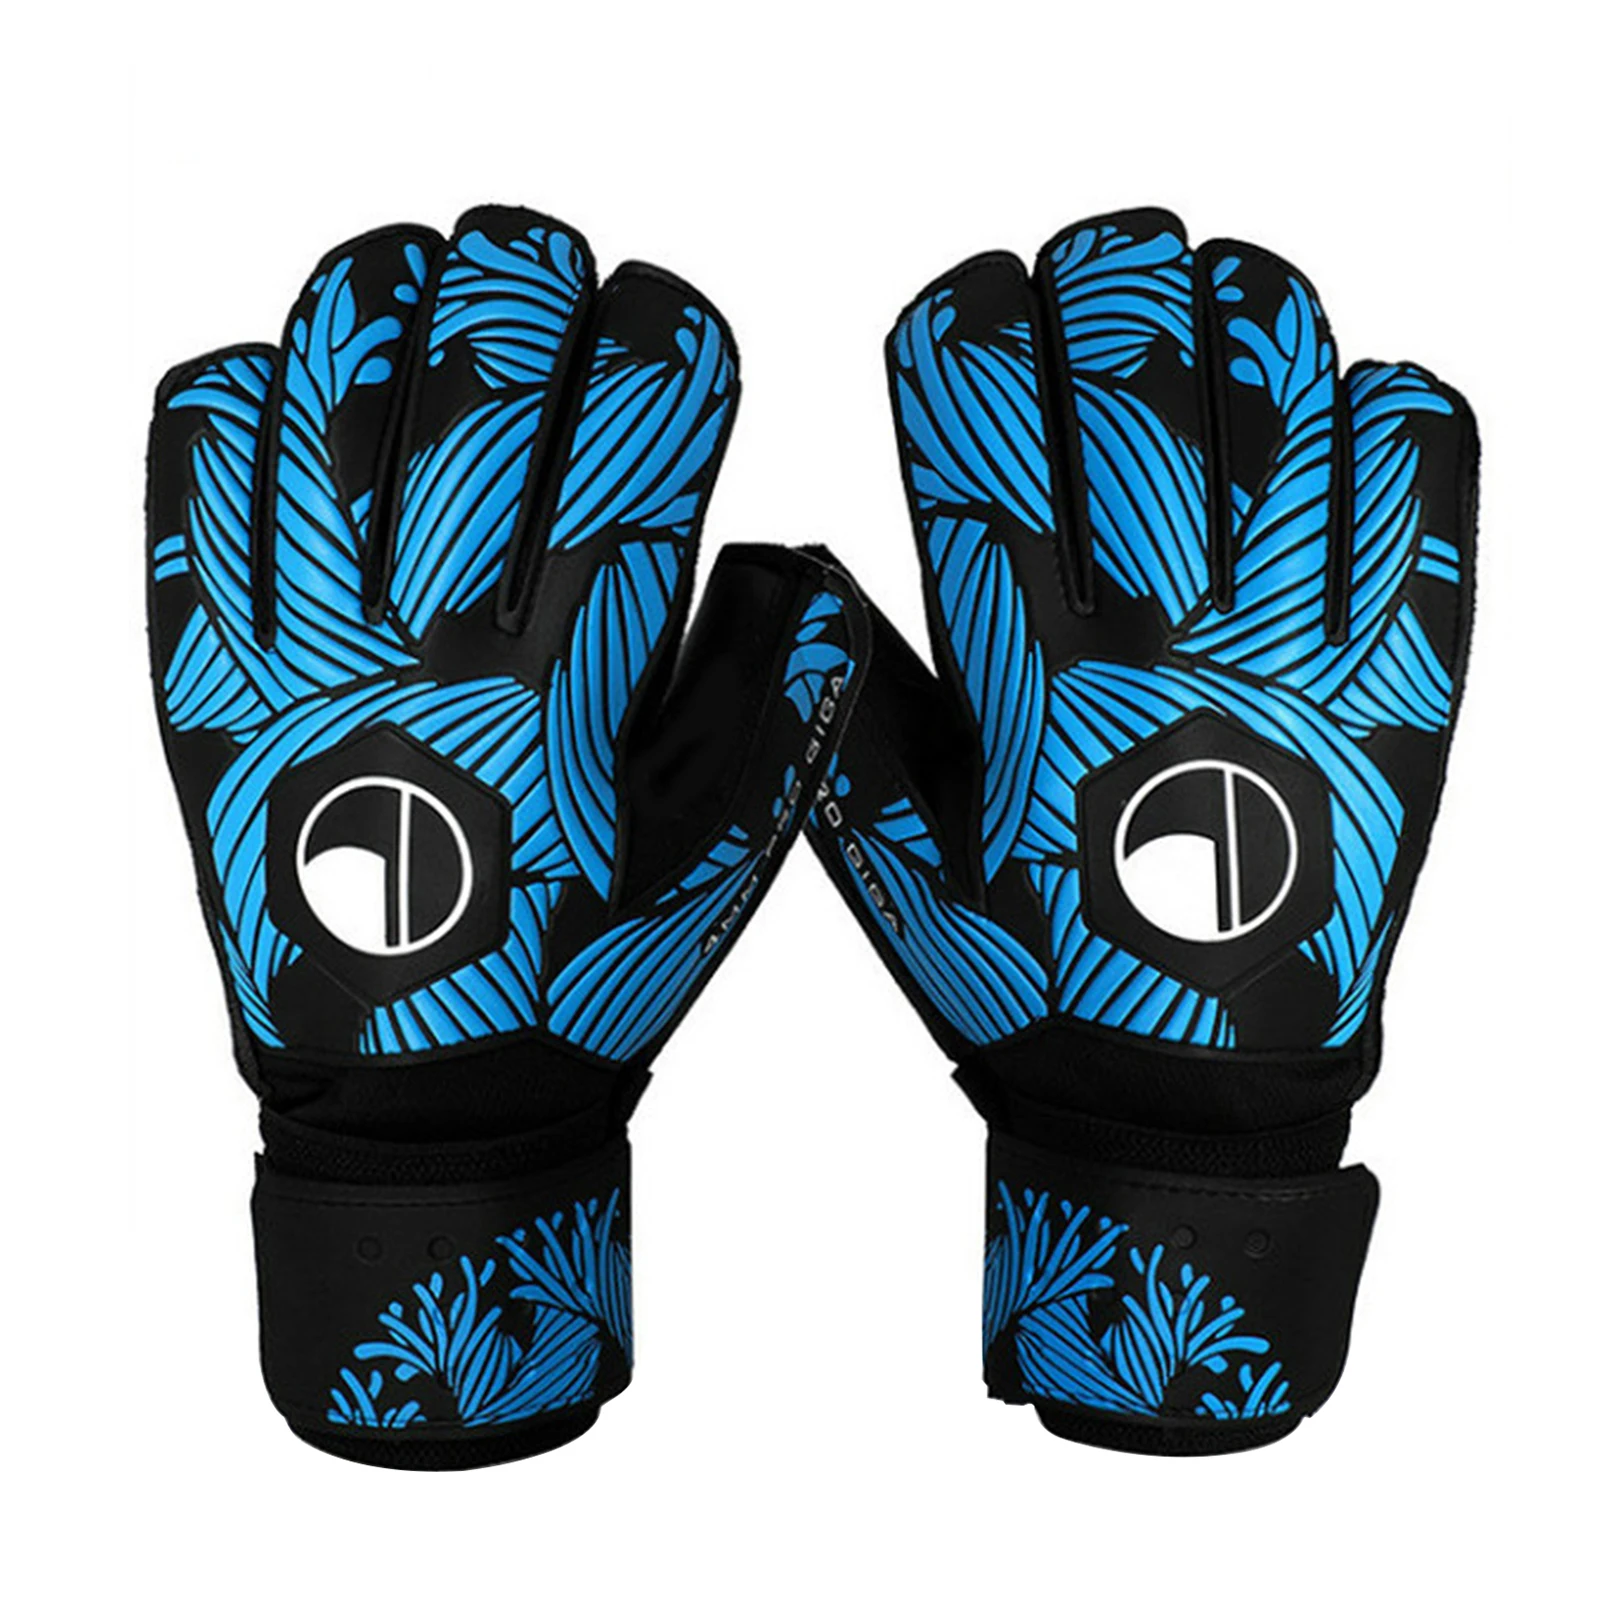 Splay Club Finger Save Football Goalkeeper Gloves Size10,Latex Palm Construction 